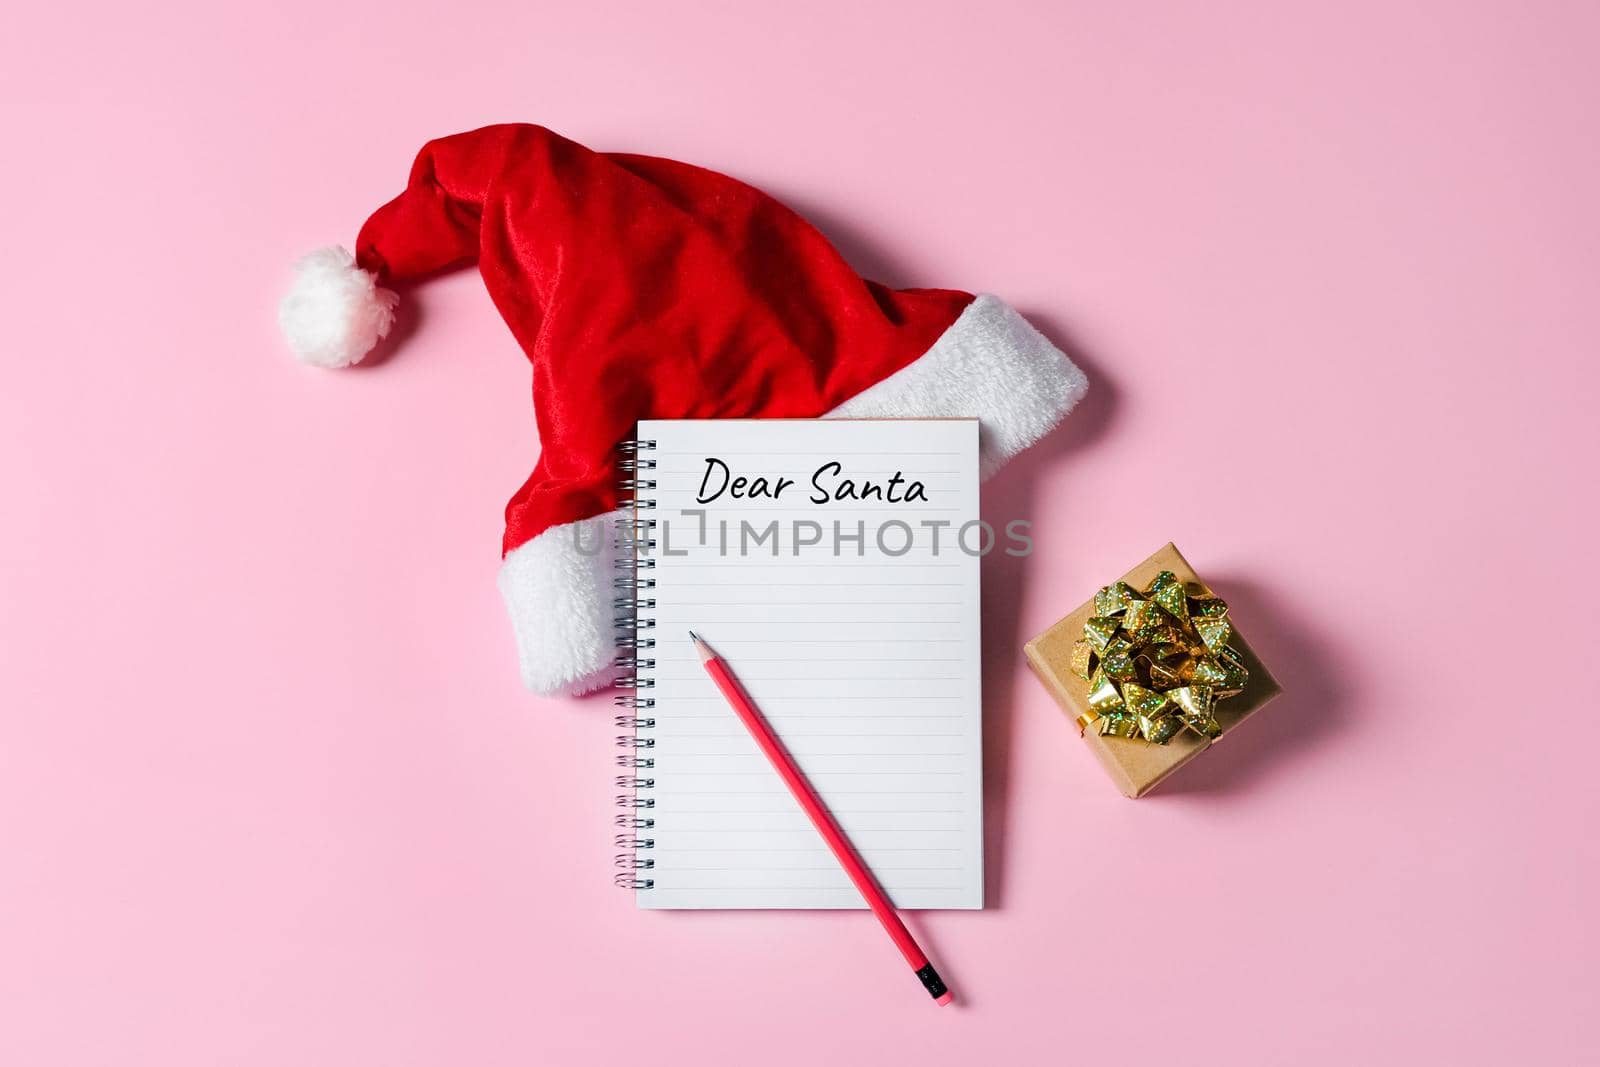 Dear Santa letter concept. Writing in Notepad letter to Santa Claus on pink background with Santa hat and gift box.